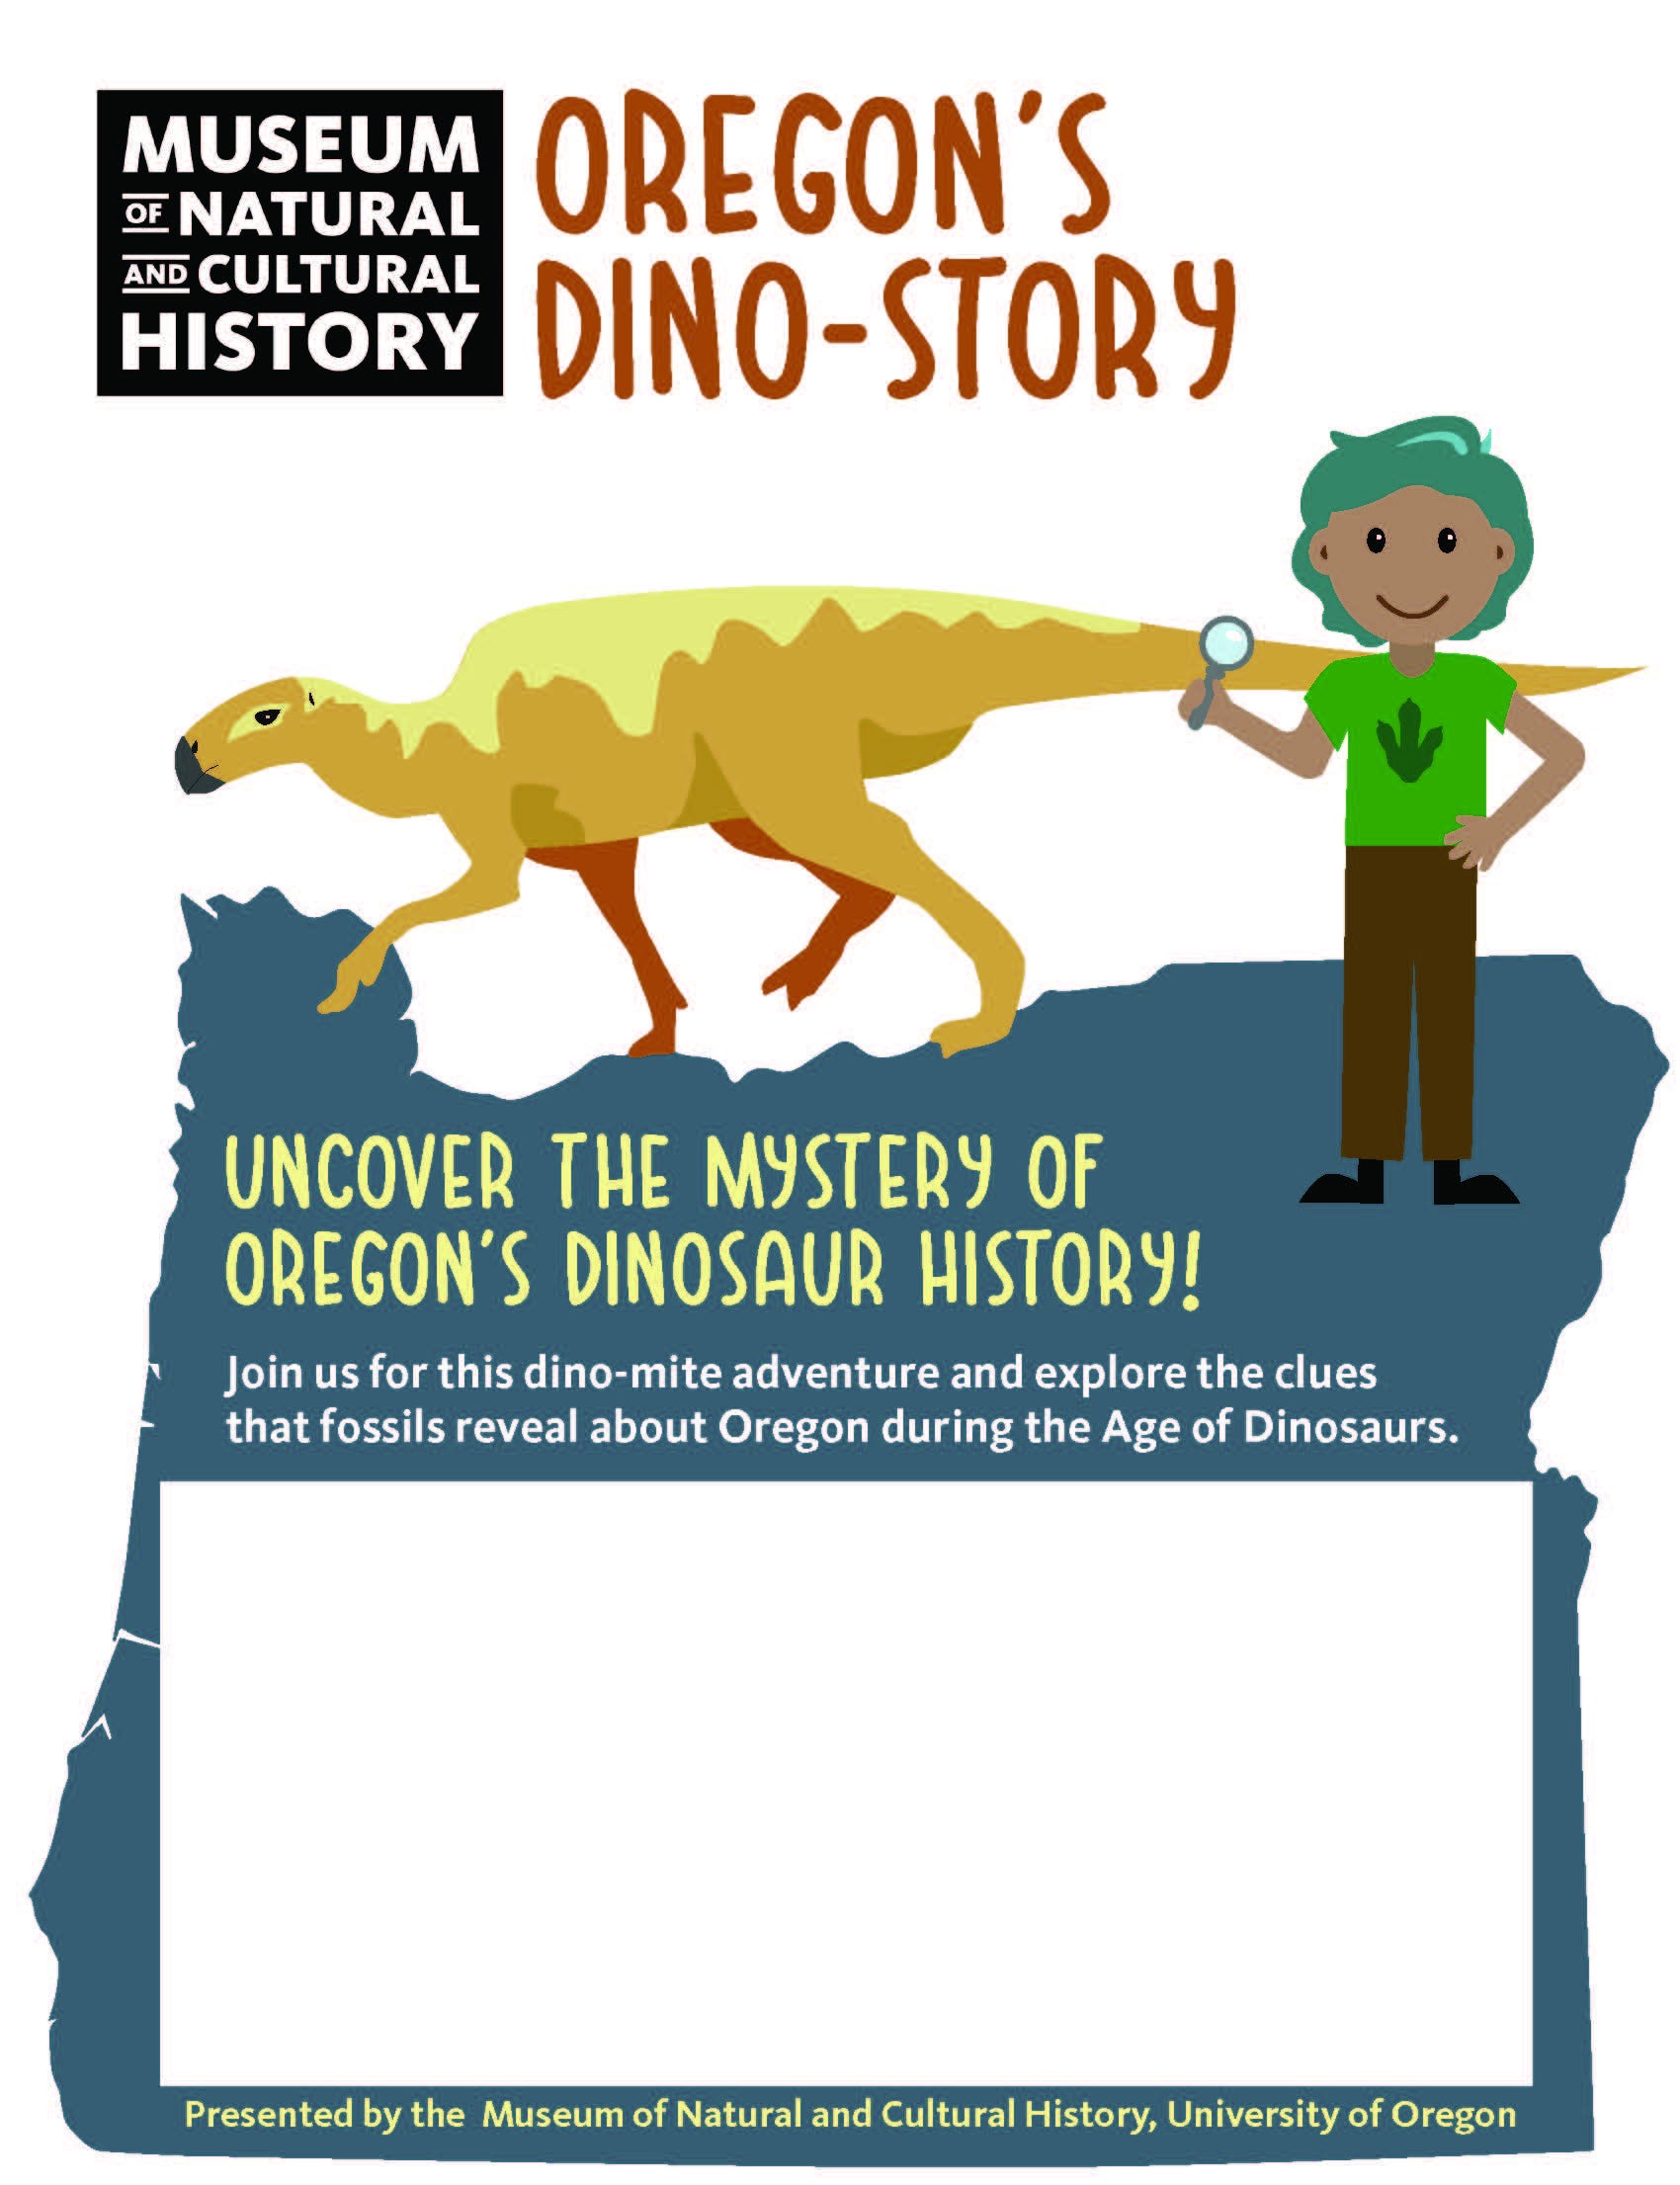 A dinosaur and person appear beneath the title Oregon's Dino-Story and above a blank space for program details